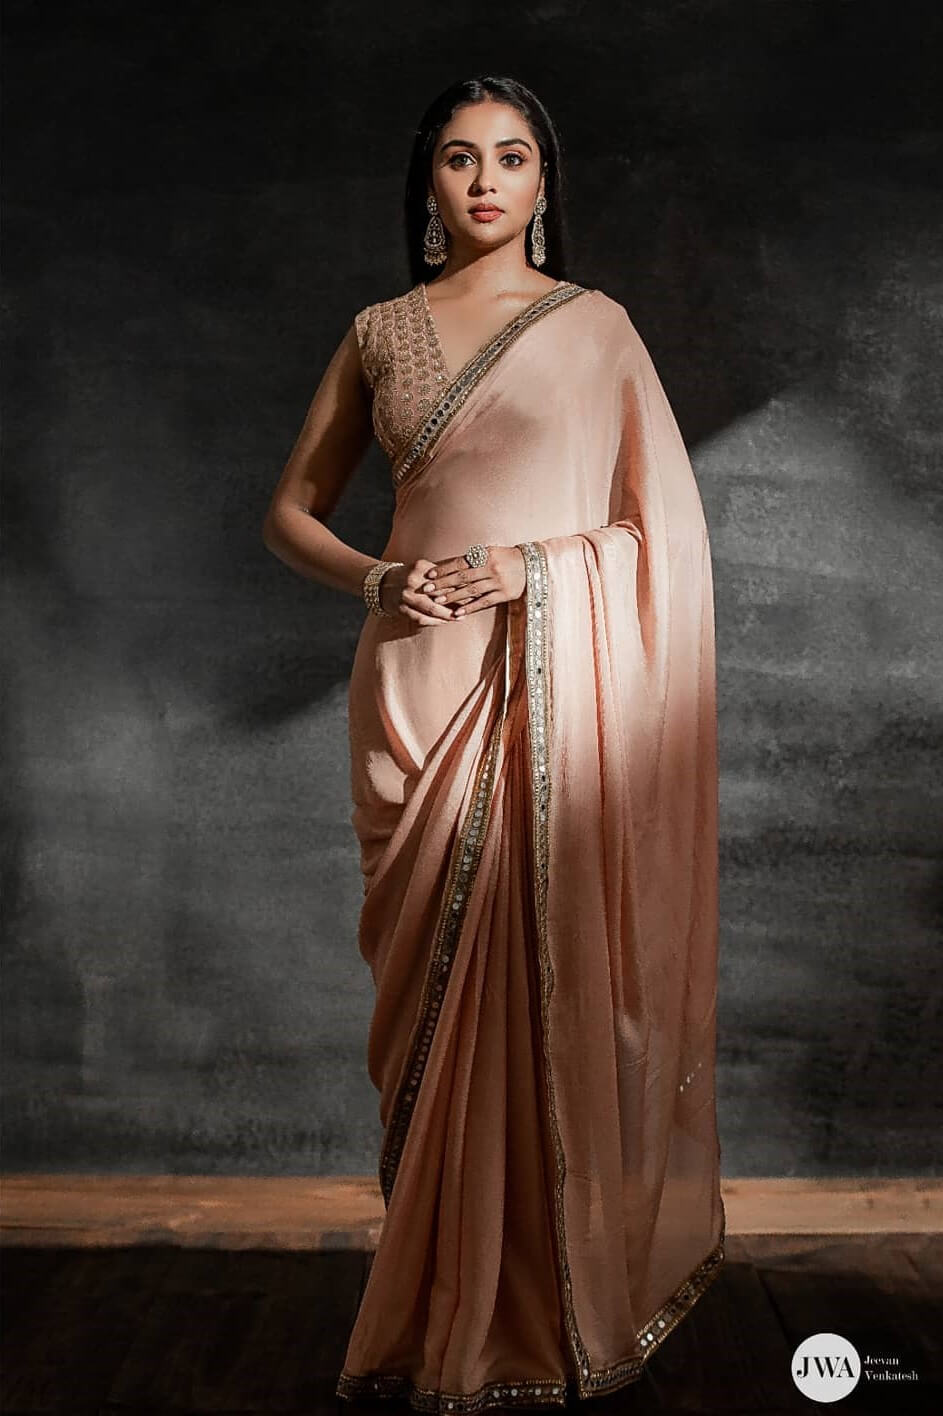 Smruthi Venkat In A Statement Embroidered Blouse And A Crepe Silk Sari With Mirror Detailing